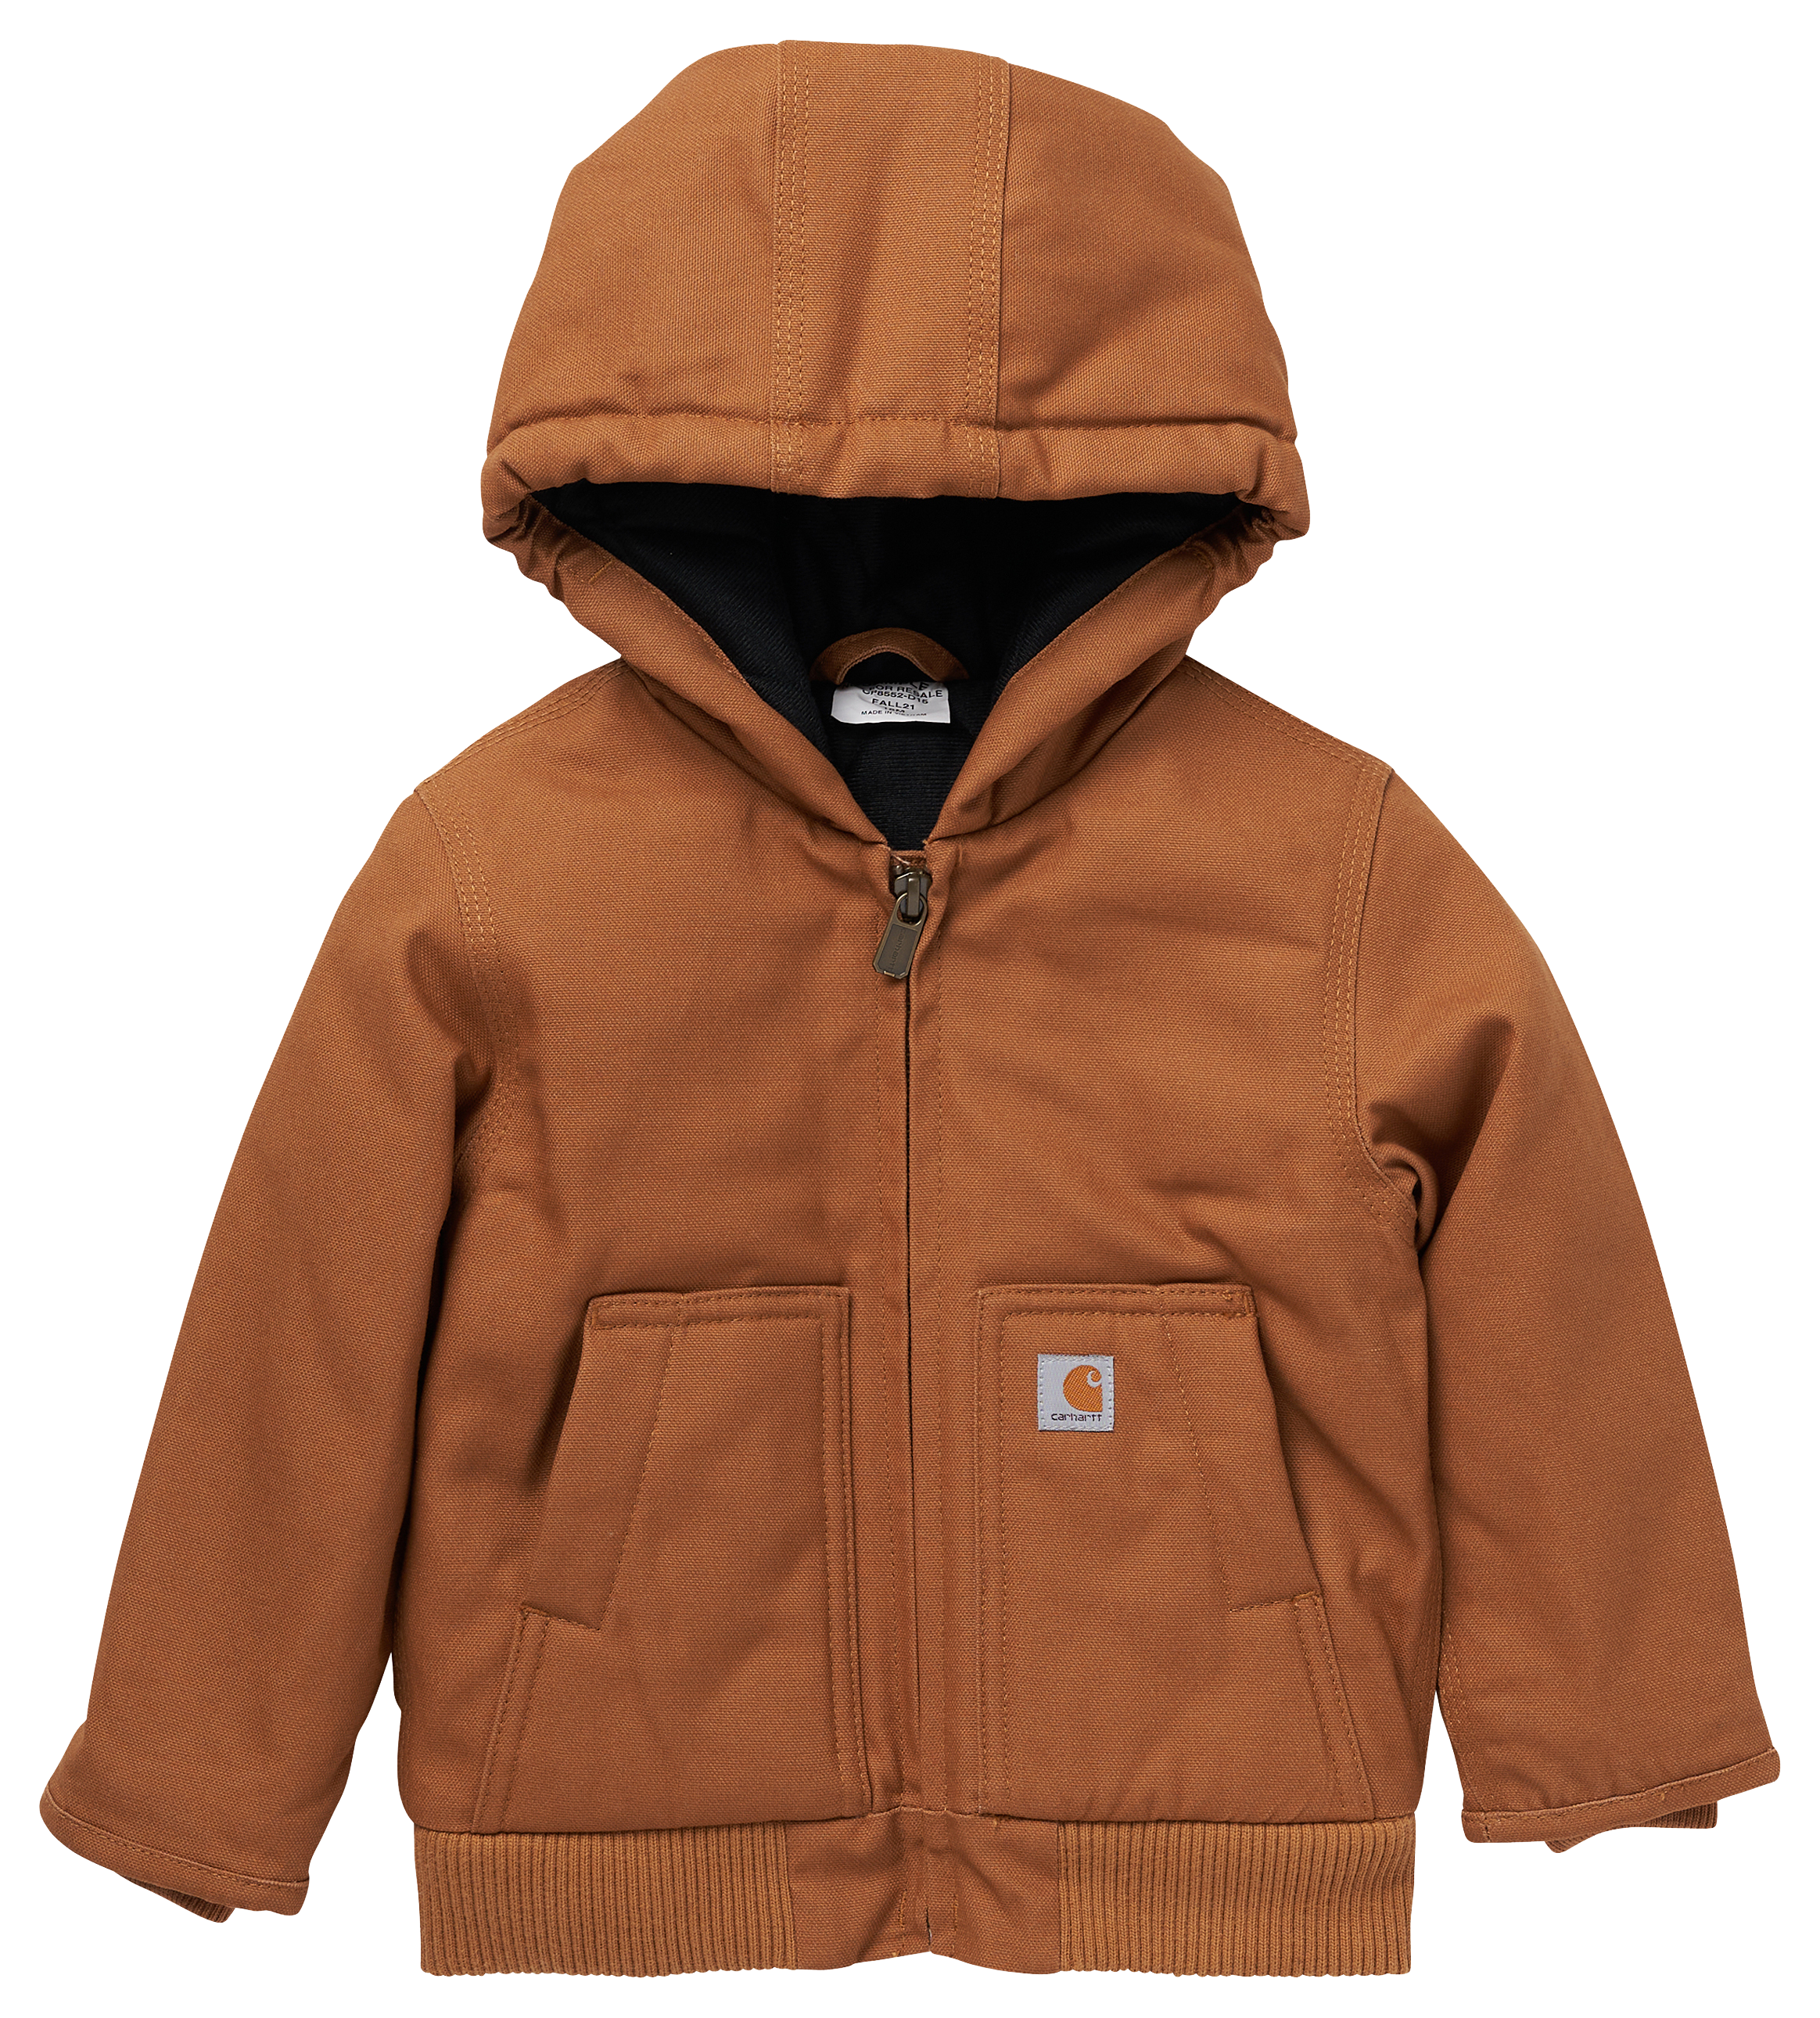 Carhartt Canvas Insulated Hooded Active Jacket for Babies or Toddlers